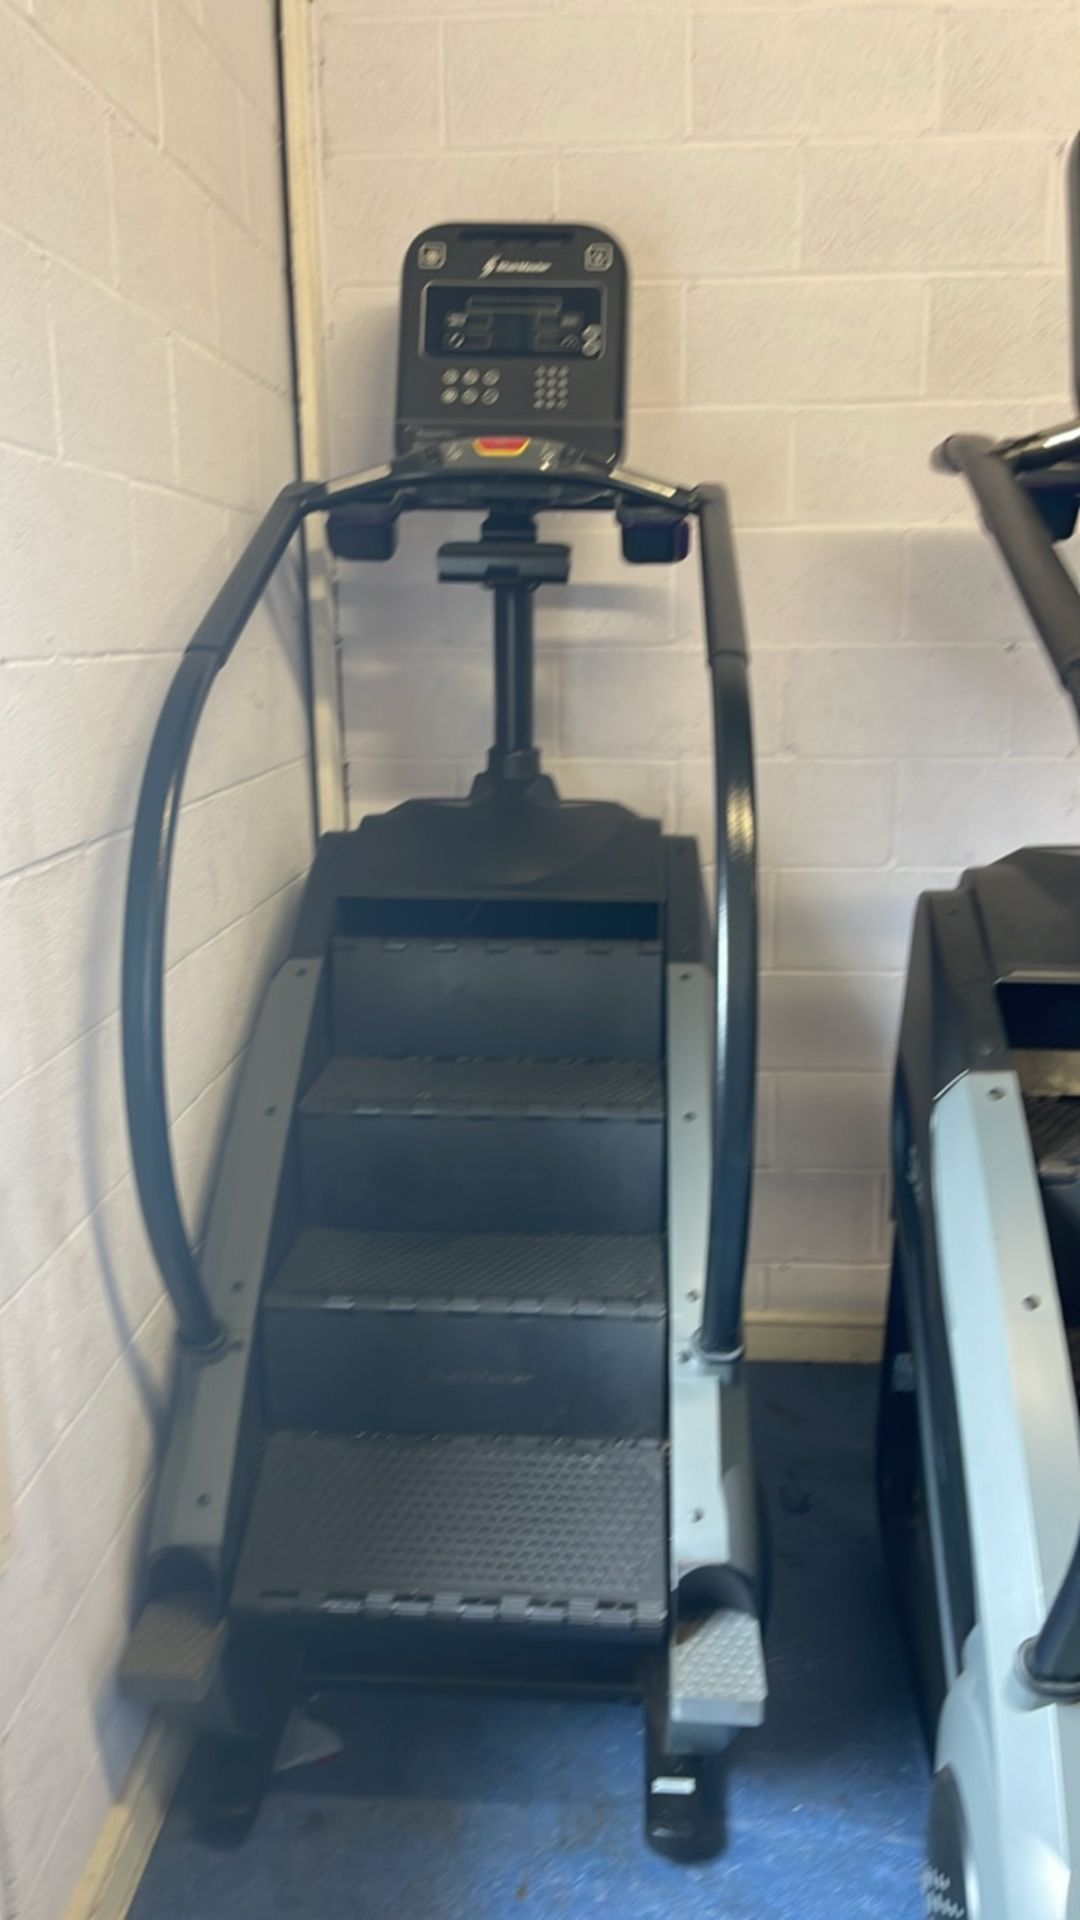 StairMaster - Image 4 of 6